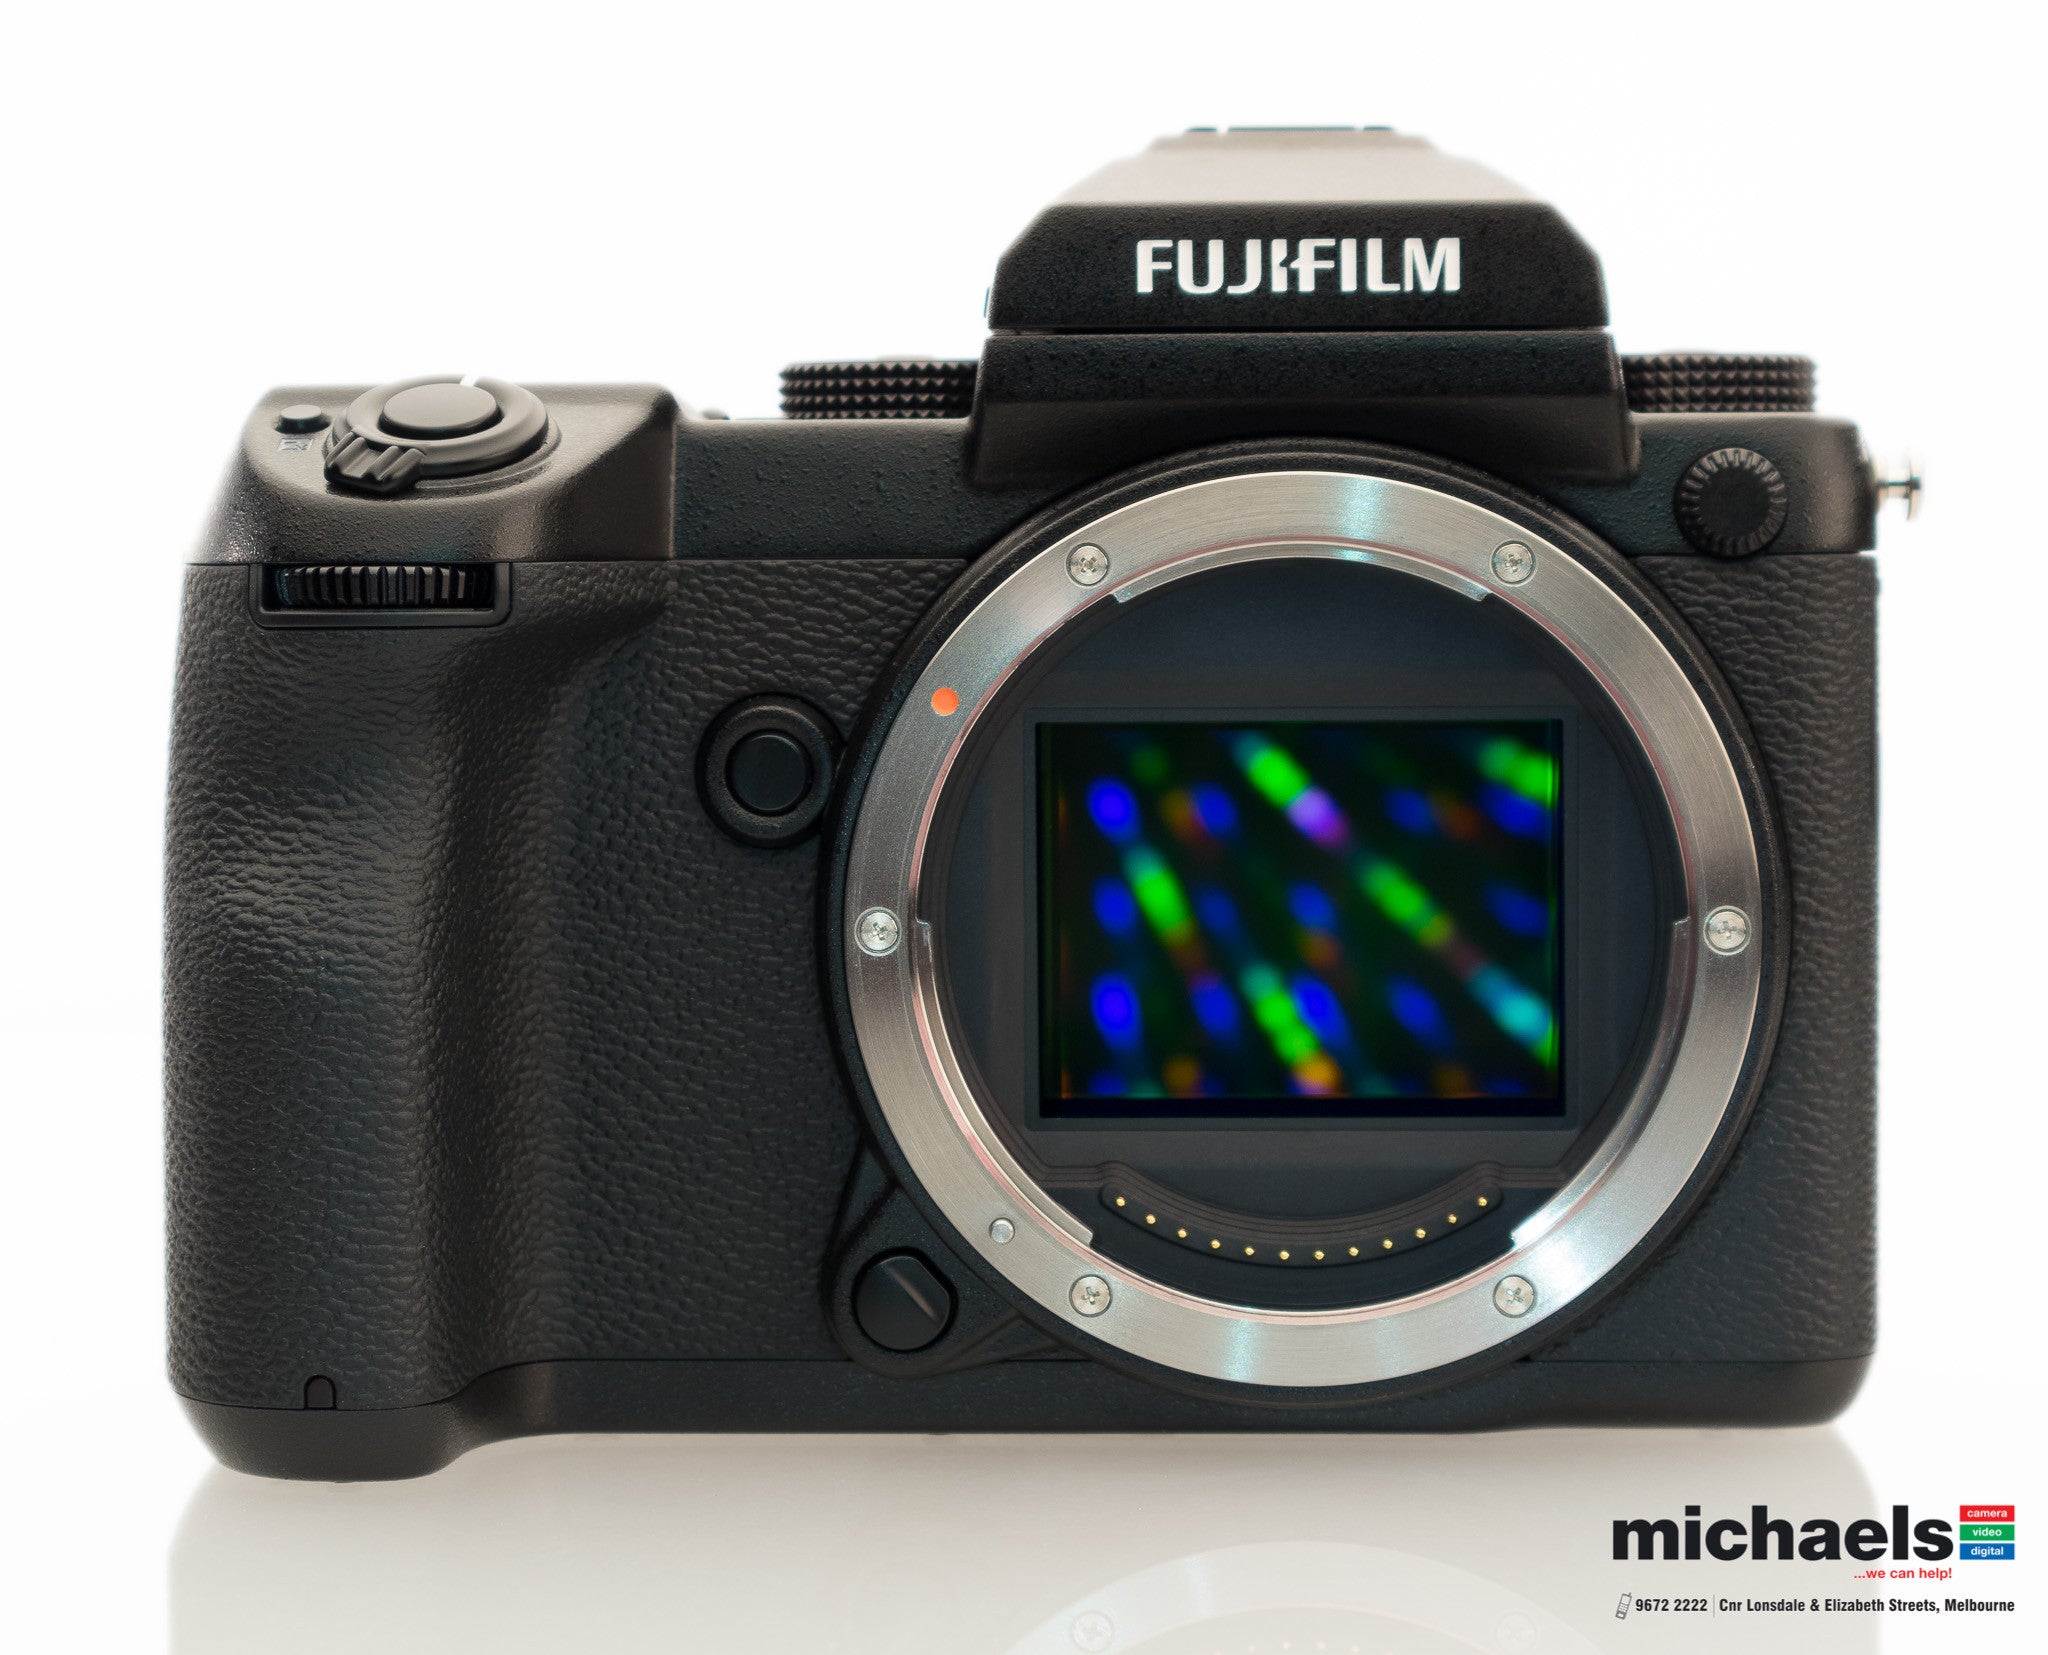 The FUJIFILM GFX 50S is now in Store at michaels camera!